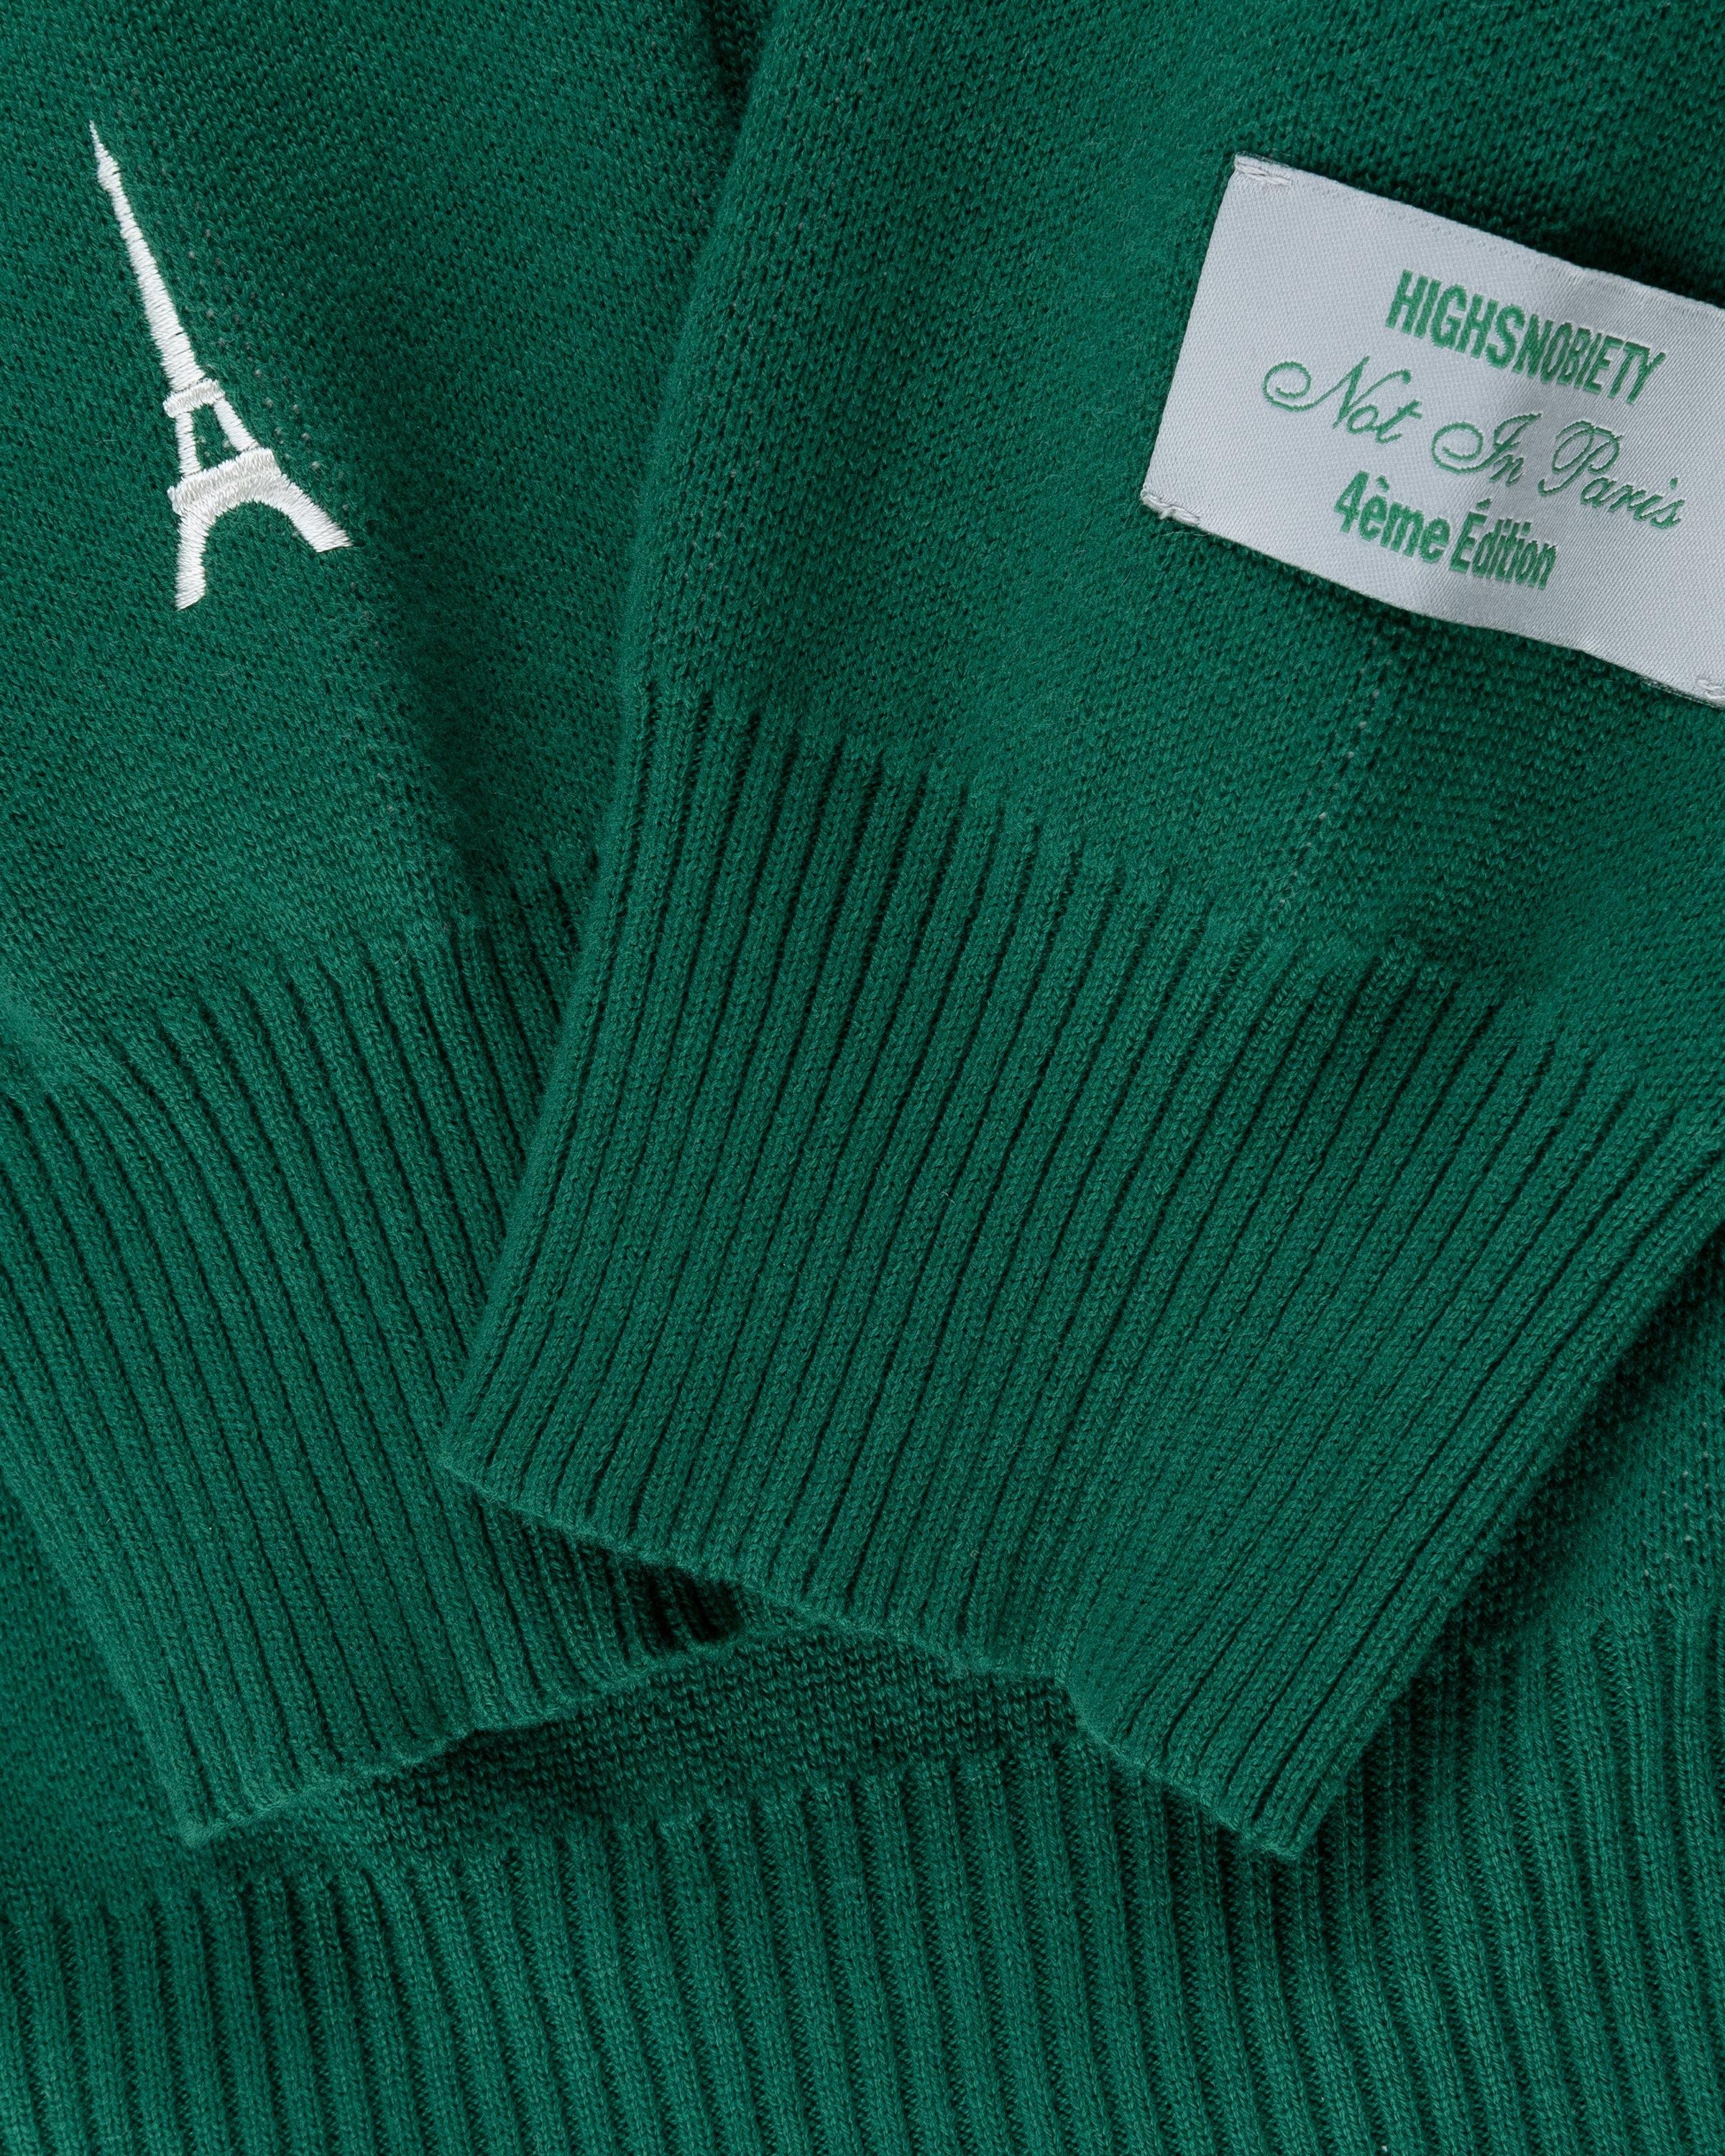 Highsnobiety - Not In Paris 4 Knitted Crewneck Sweater Green - Clothing - Green - Image 6